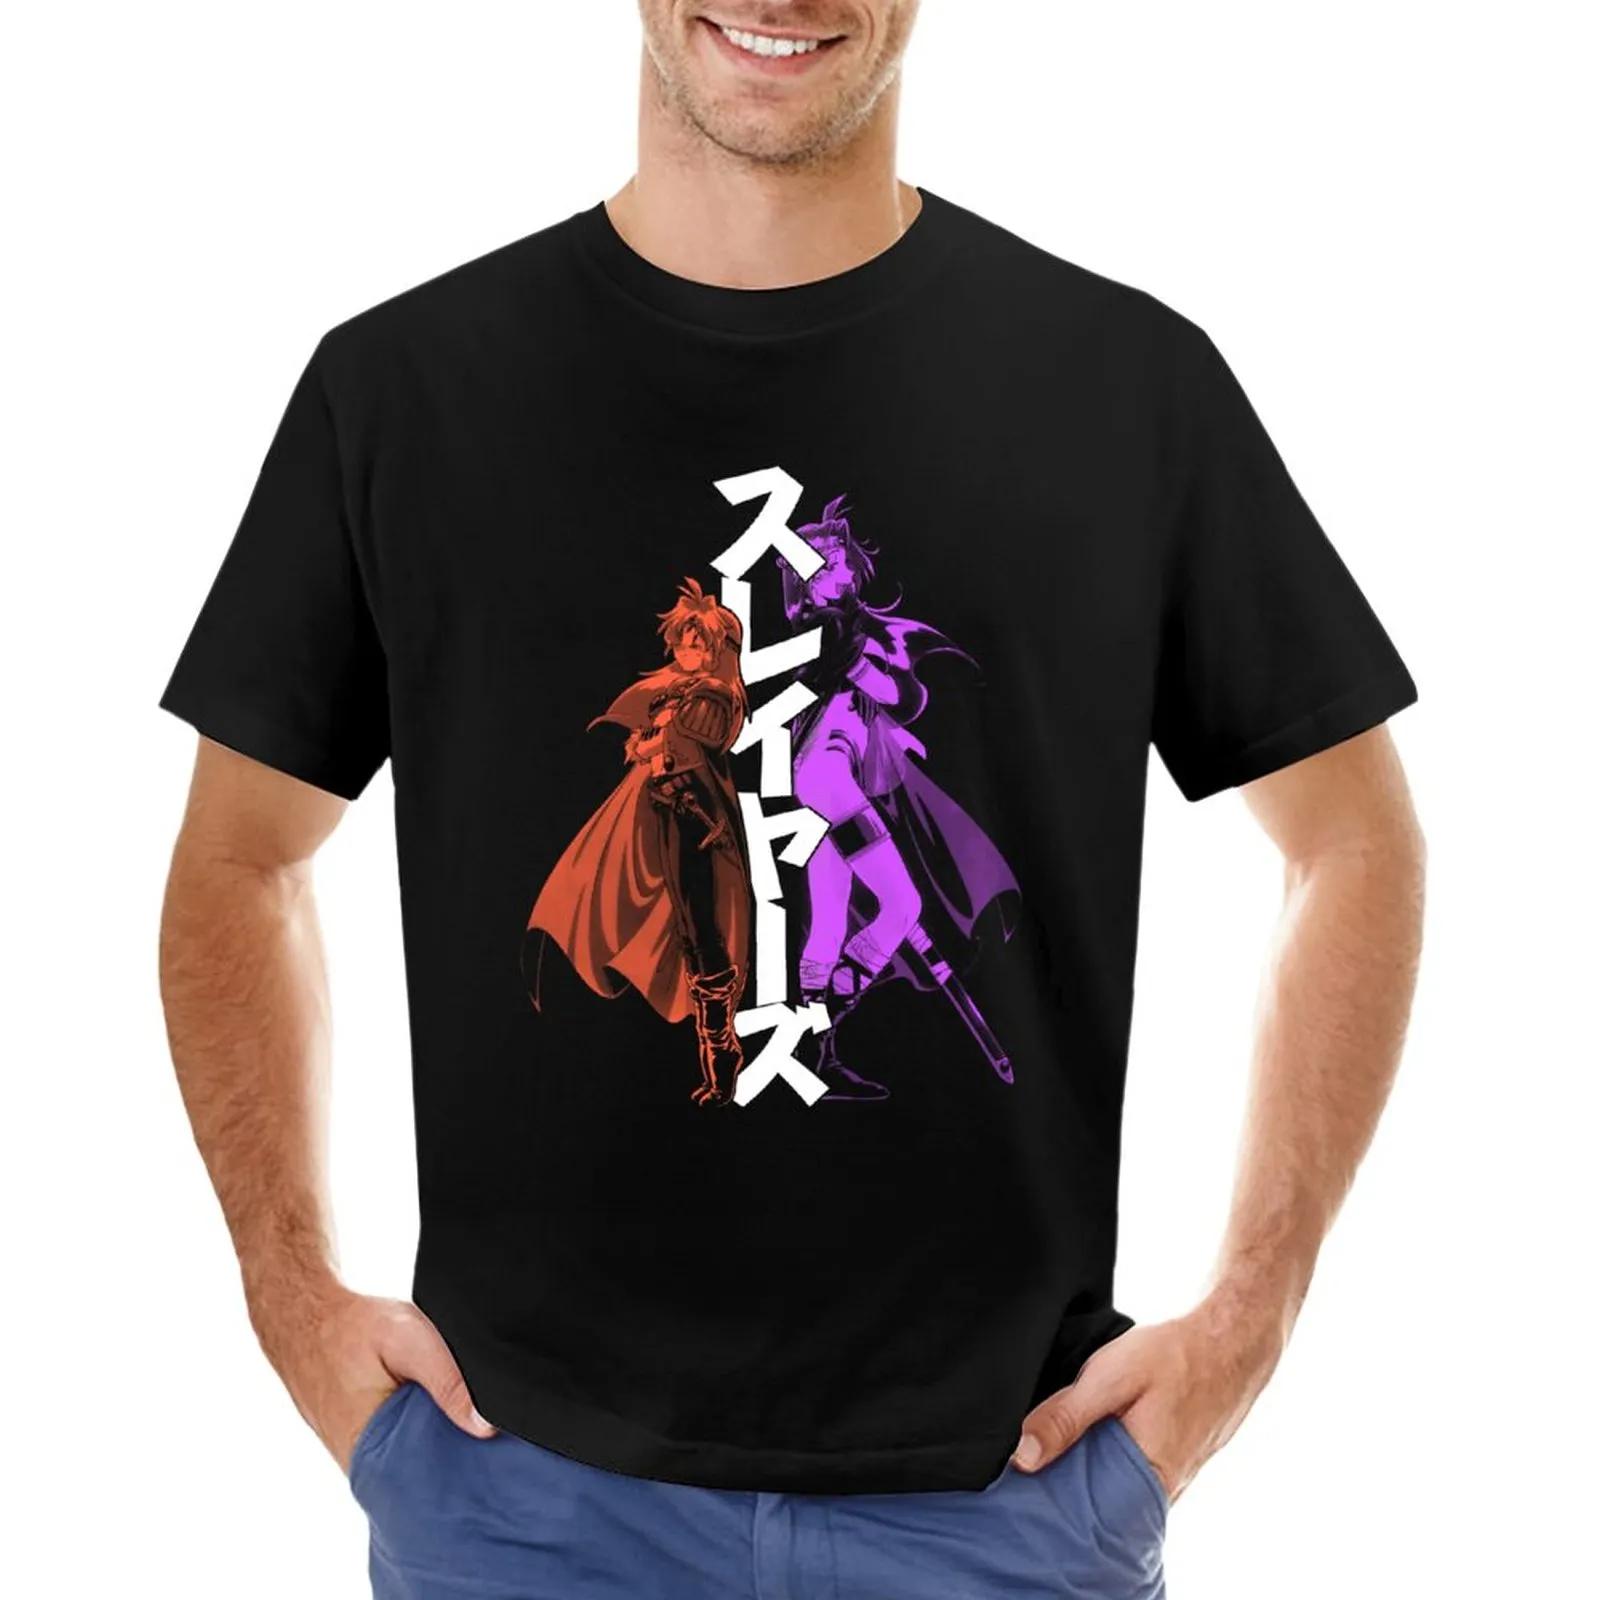 Witch Sisters (color) T-Shirt tees Short t-shirt fitted t shirts for men